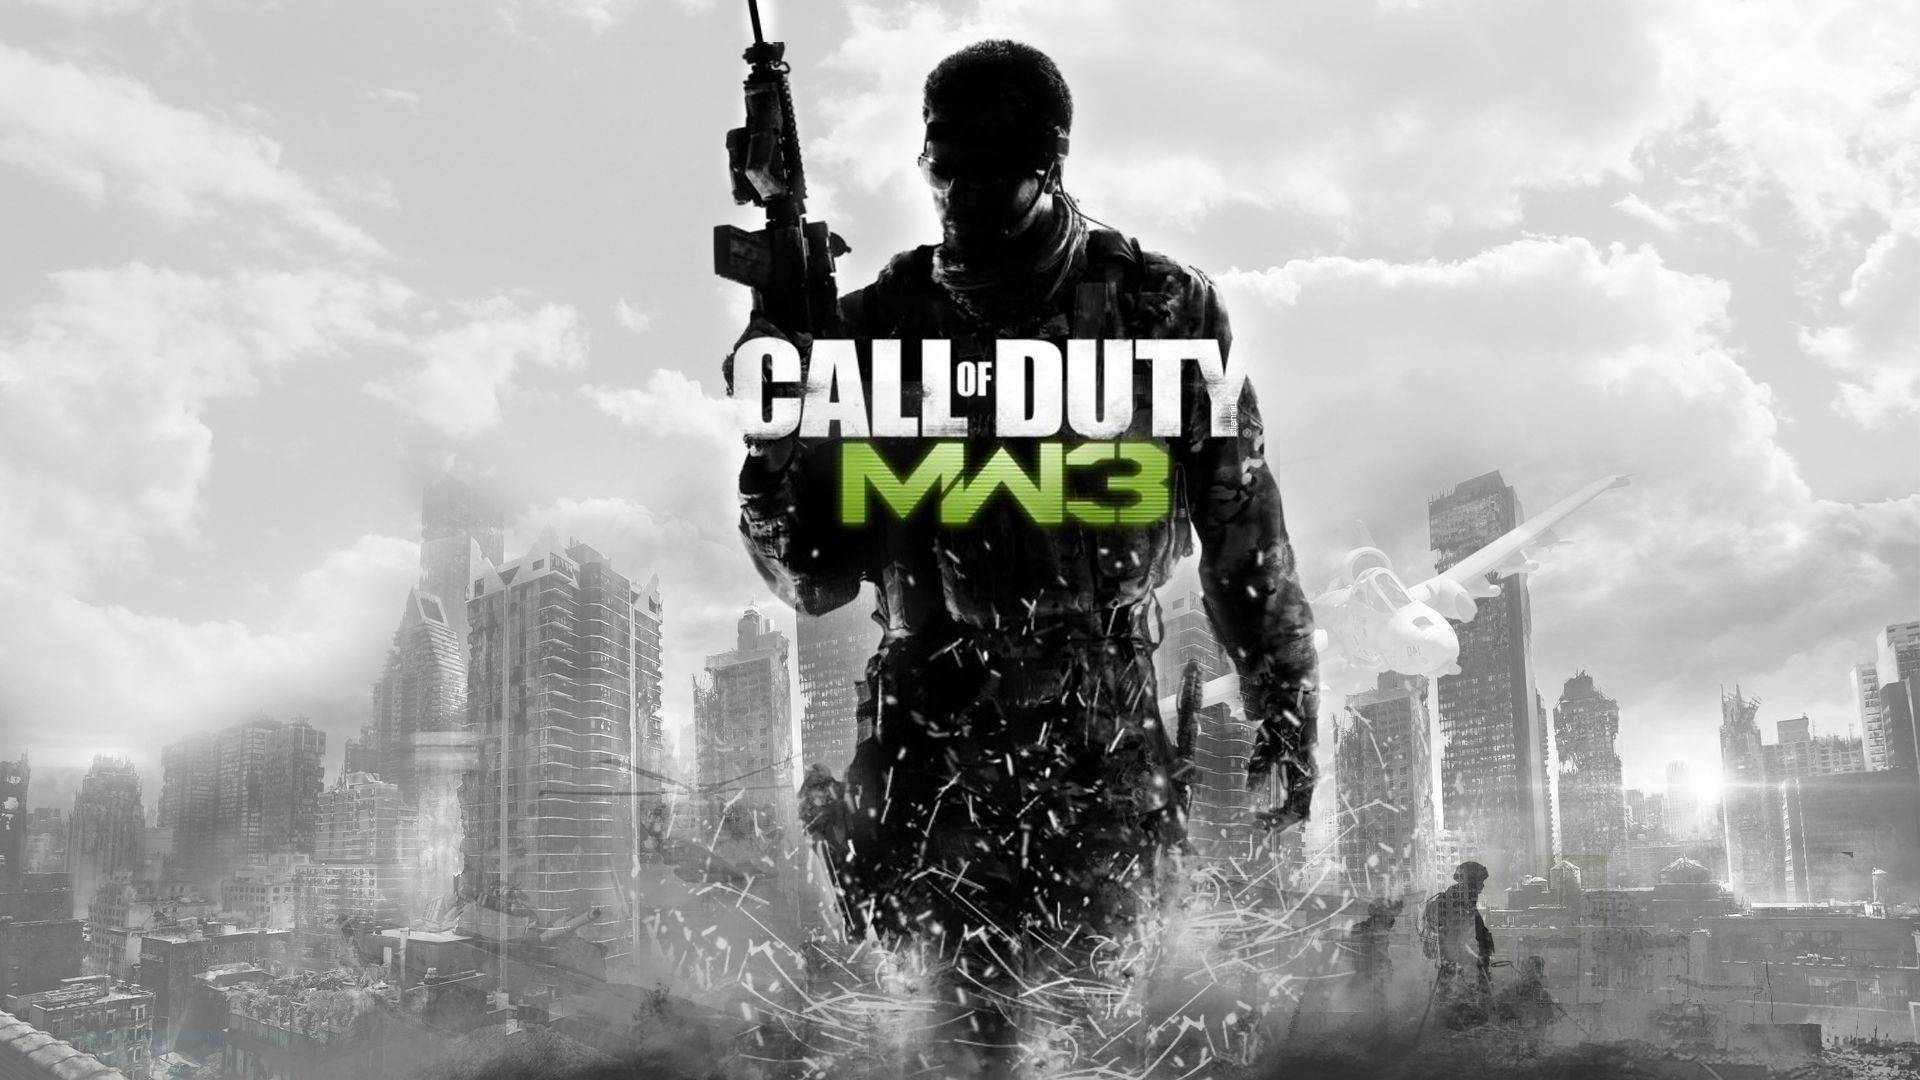 Call of Duty: MW3 wallpapers HD #1 - 1920x1080